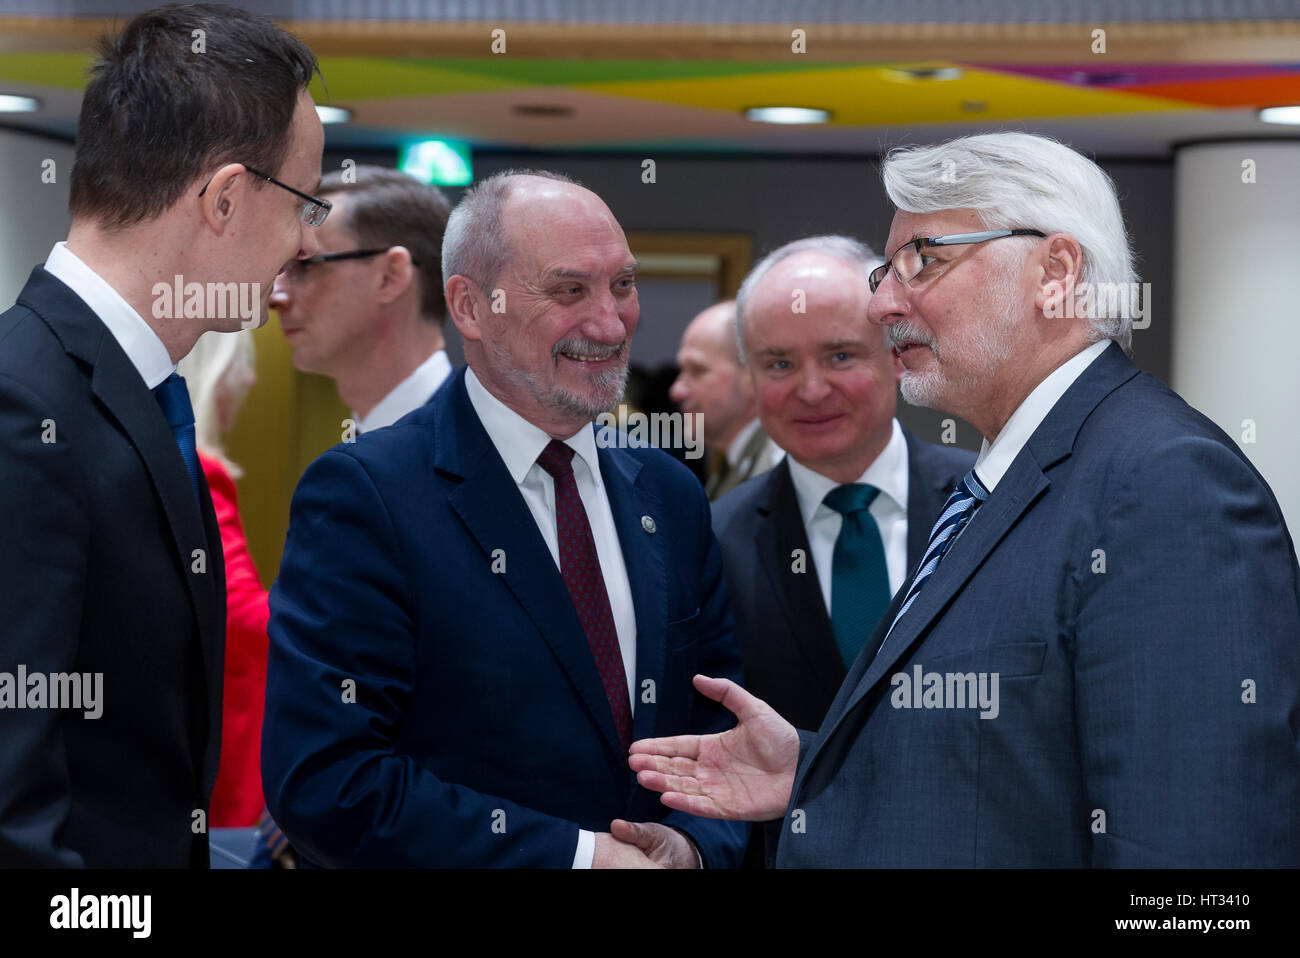 March 6, 2017 - Brussels, Belgium: Hungarian Minister of Foreign Affairs & External Economy Peter Szijjarto (L) is talking with the Polish Minister of National Defense Antoni Macierewicz (C) and the Polish Minister of Foreign Affairs Witold Waszczykowski (R) during an EU Defense and foreign affairs Ministers meeting in the Europa building, the EU Council headquarter. - NO WIRE SERVICE- Photo: Thierry Monasse/dpa Photo: Thierry Monasse/dpa Stock Photo